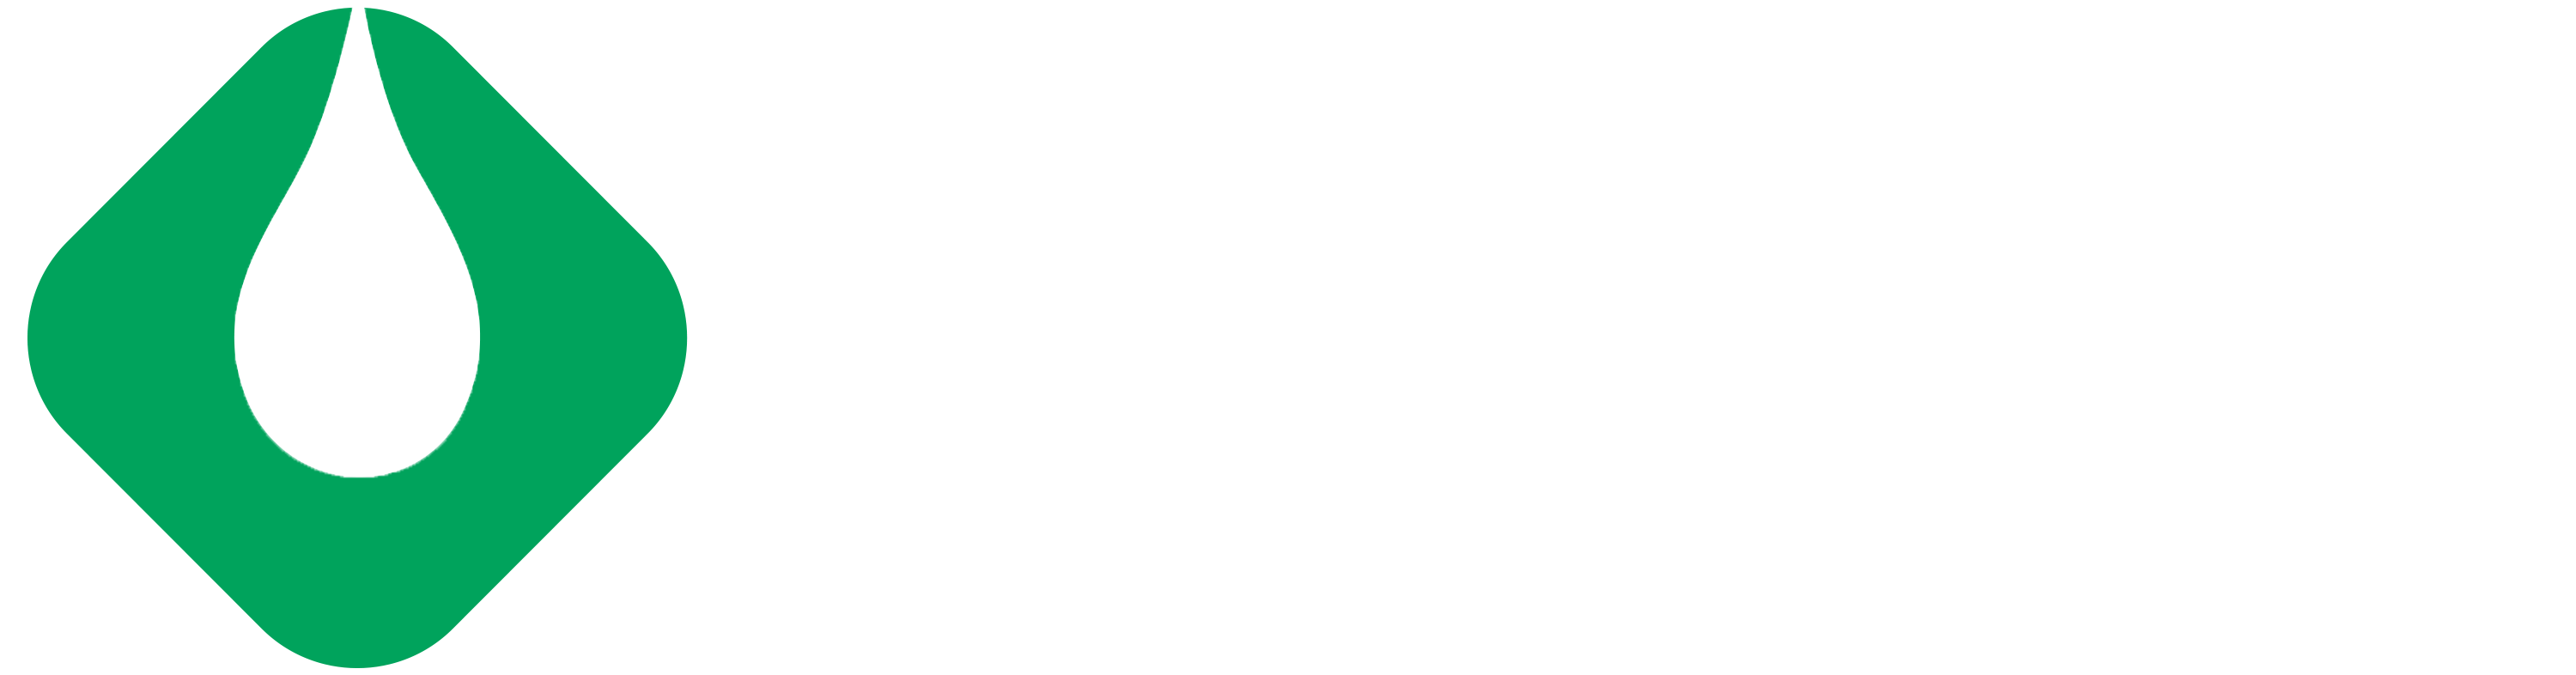 Global Fueling Systems logo